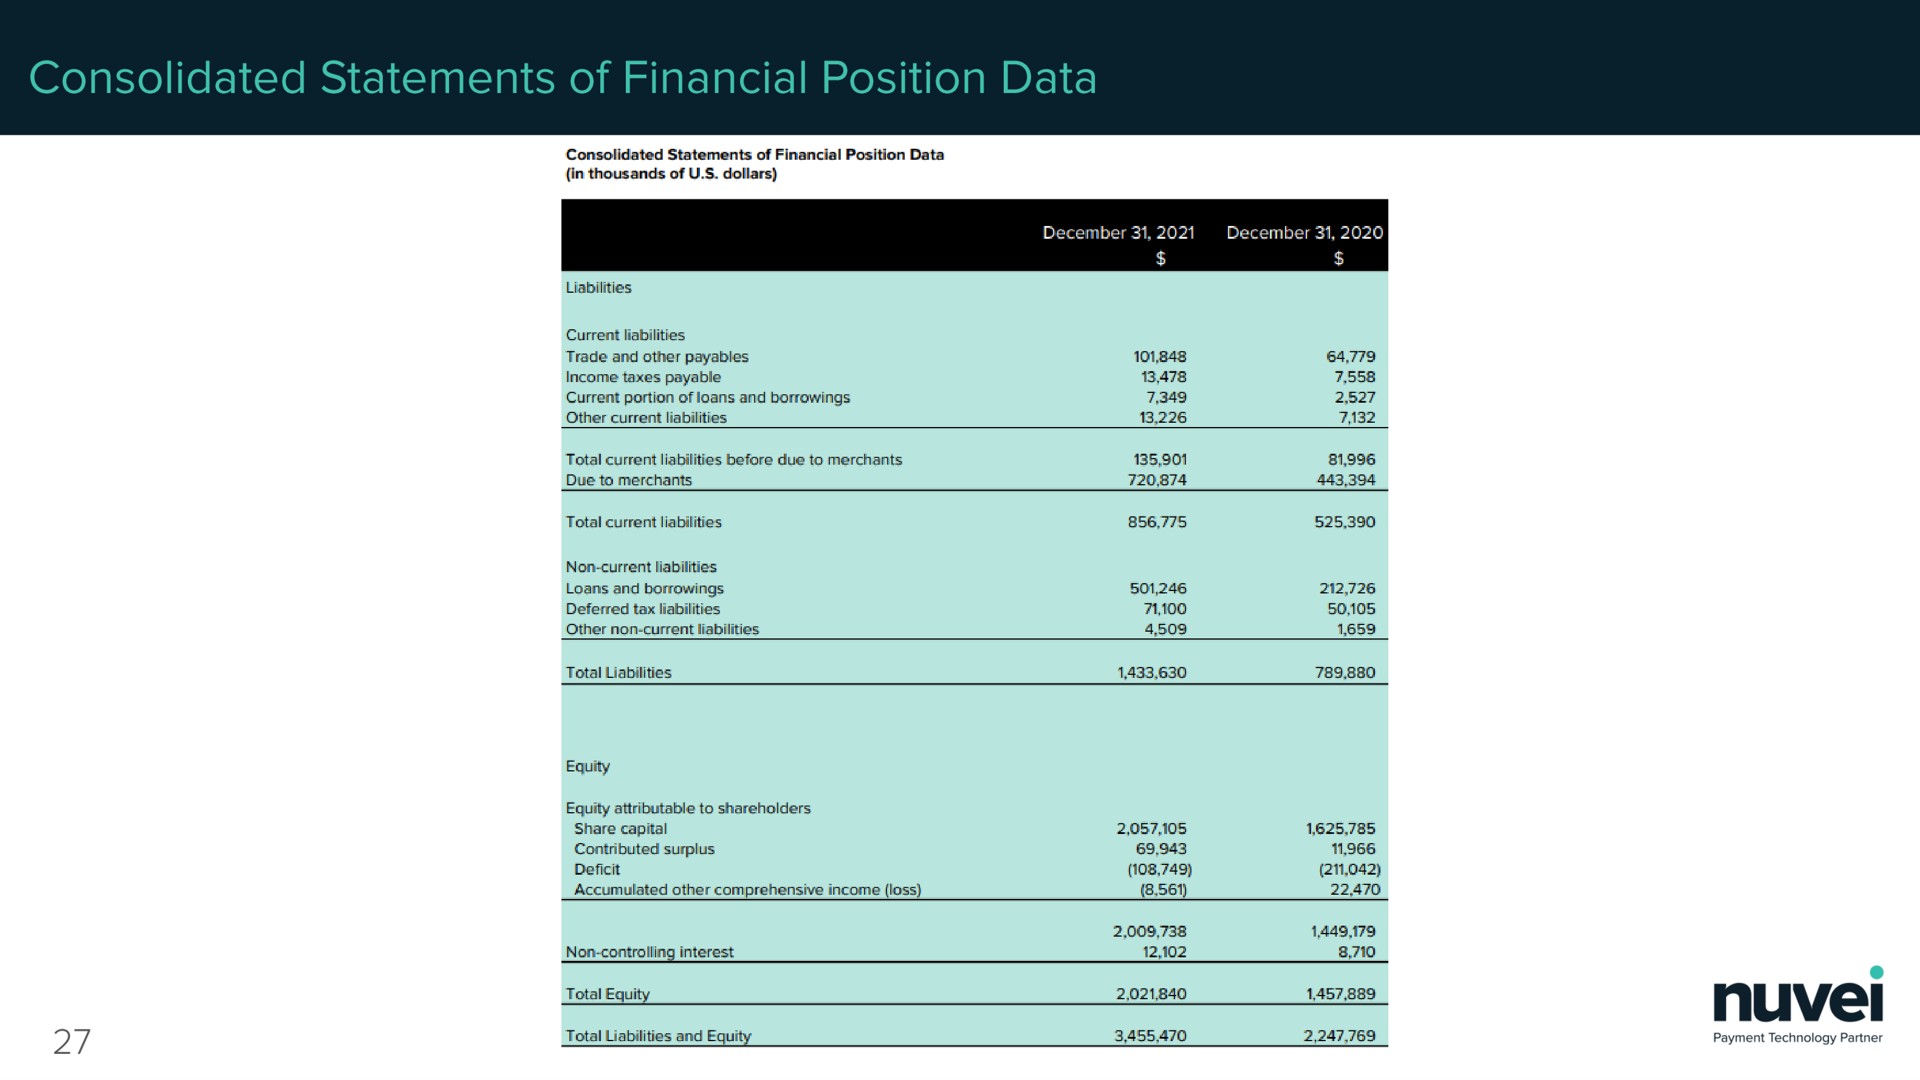 consolidated statements of financial position | Nuvei